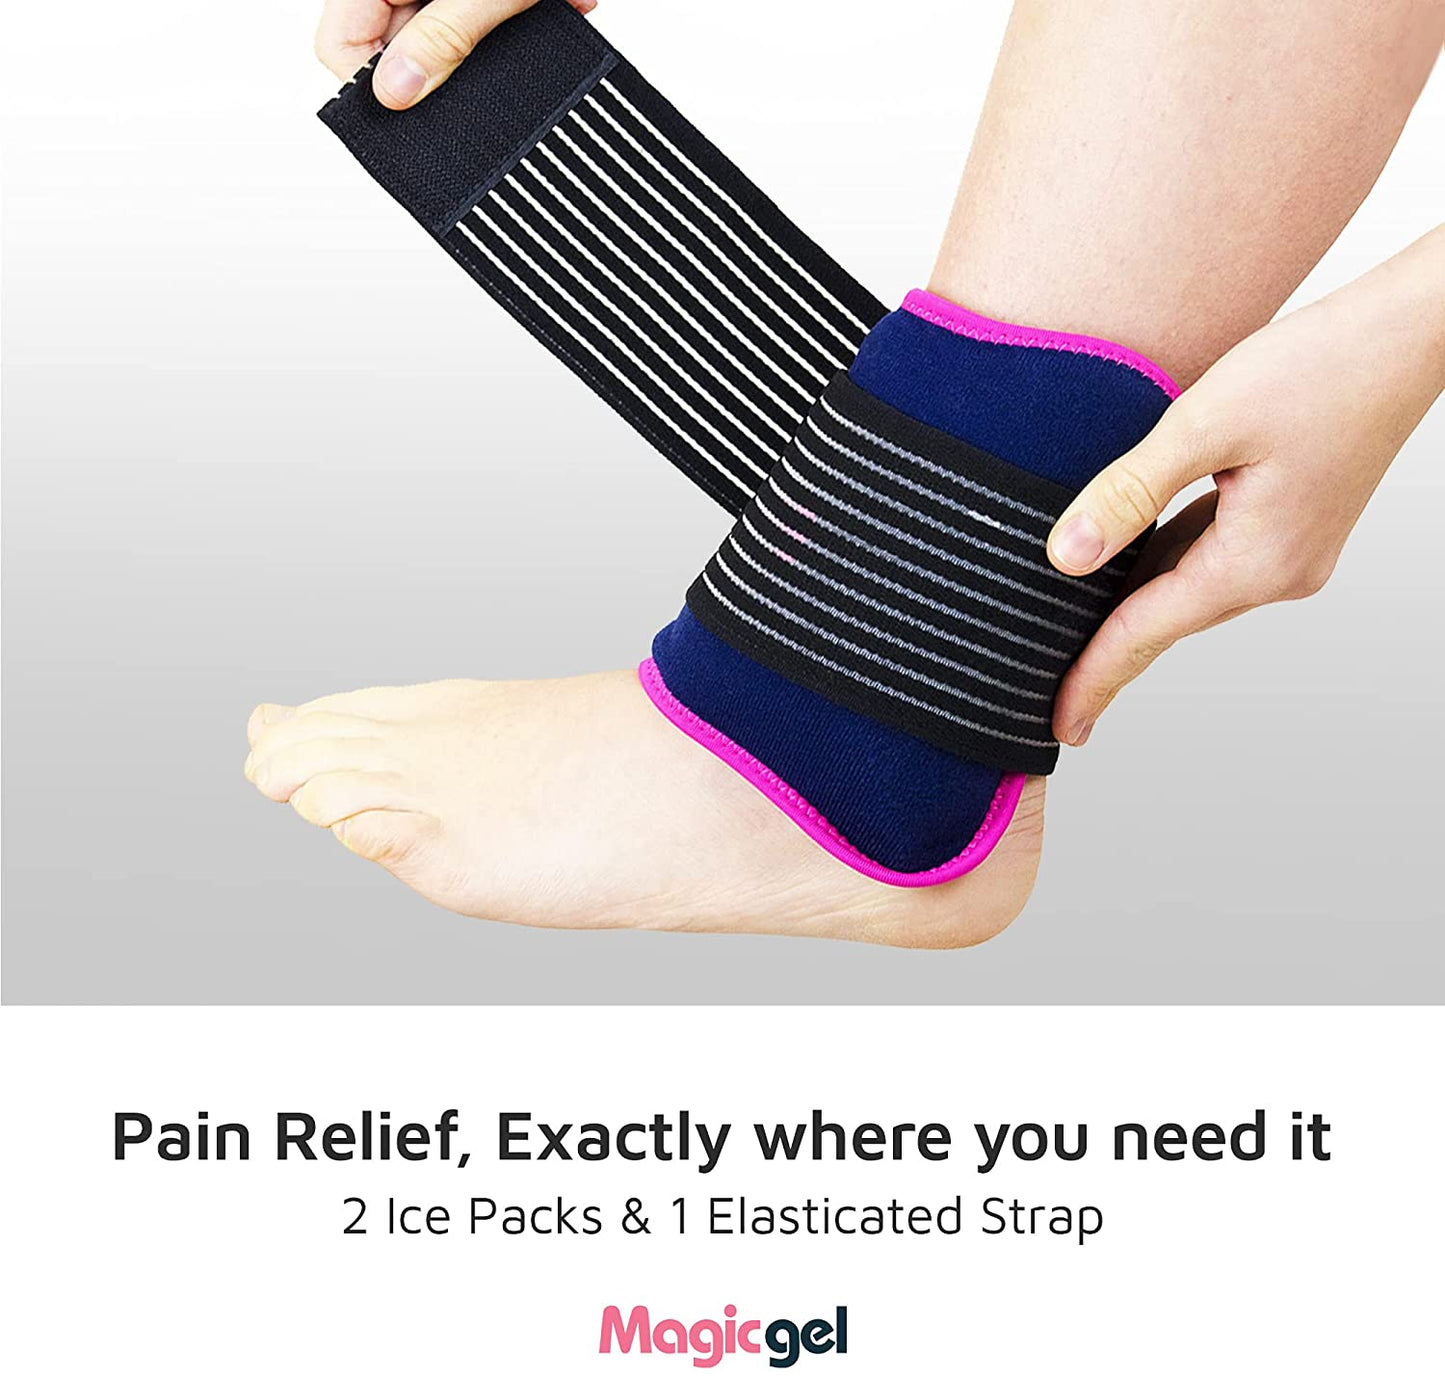 Premium Ice Pack for All Body Parts (For Hot or Cold Use)